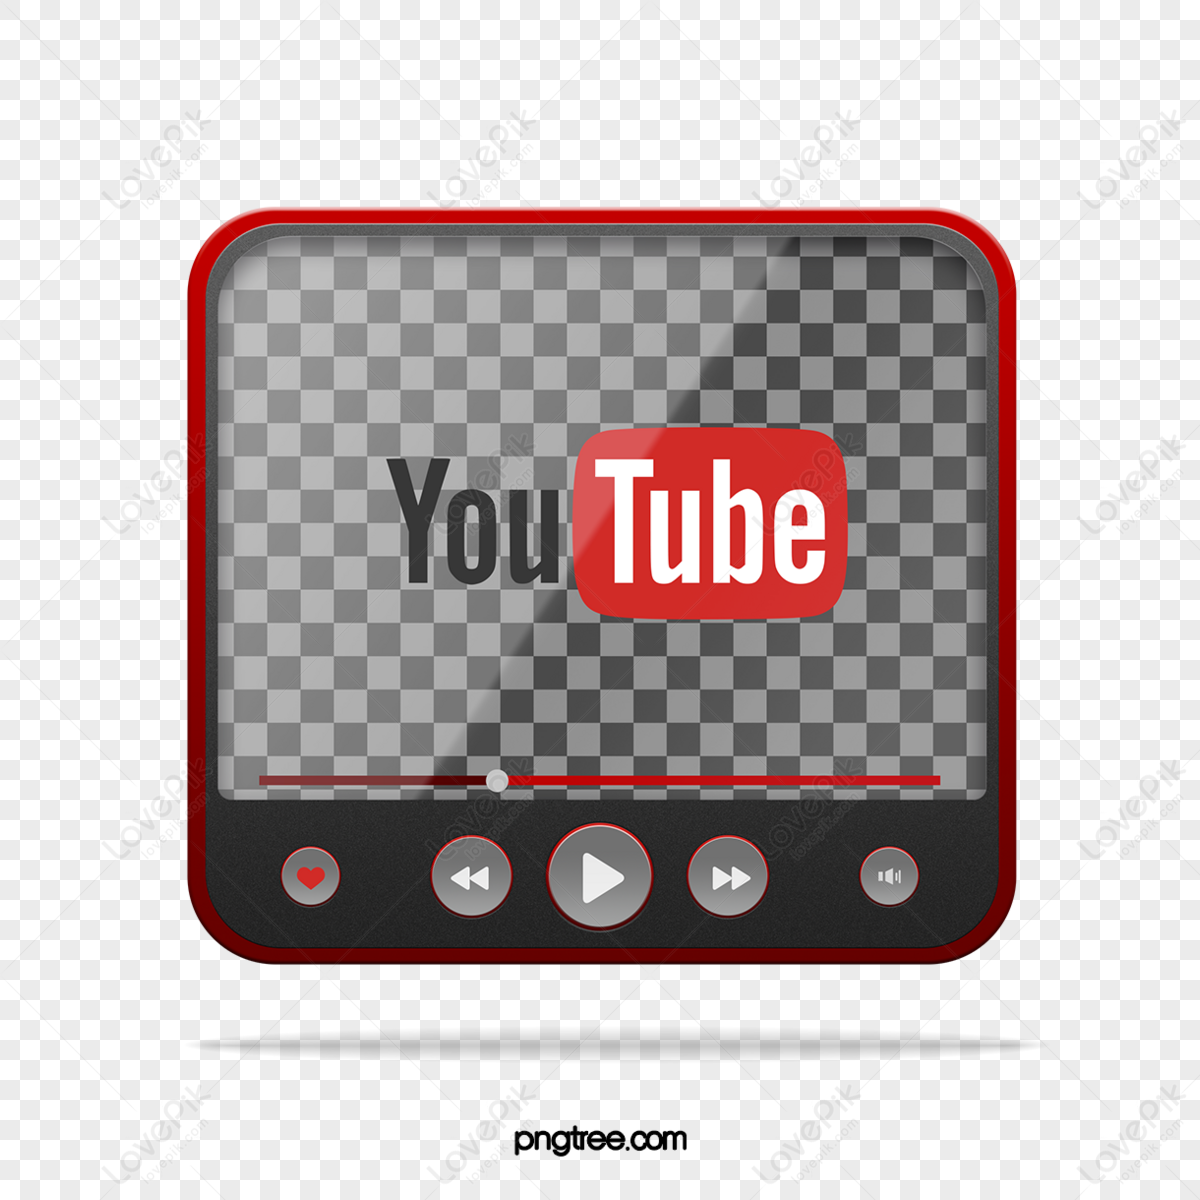 How to Make a Good Logo for Your YouTube Channel